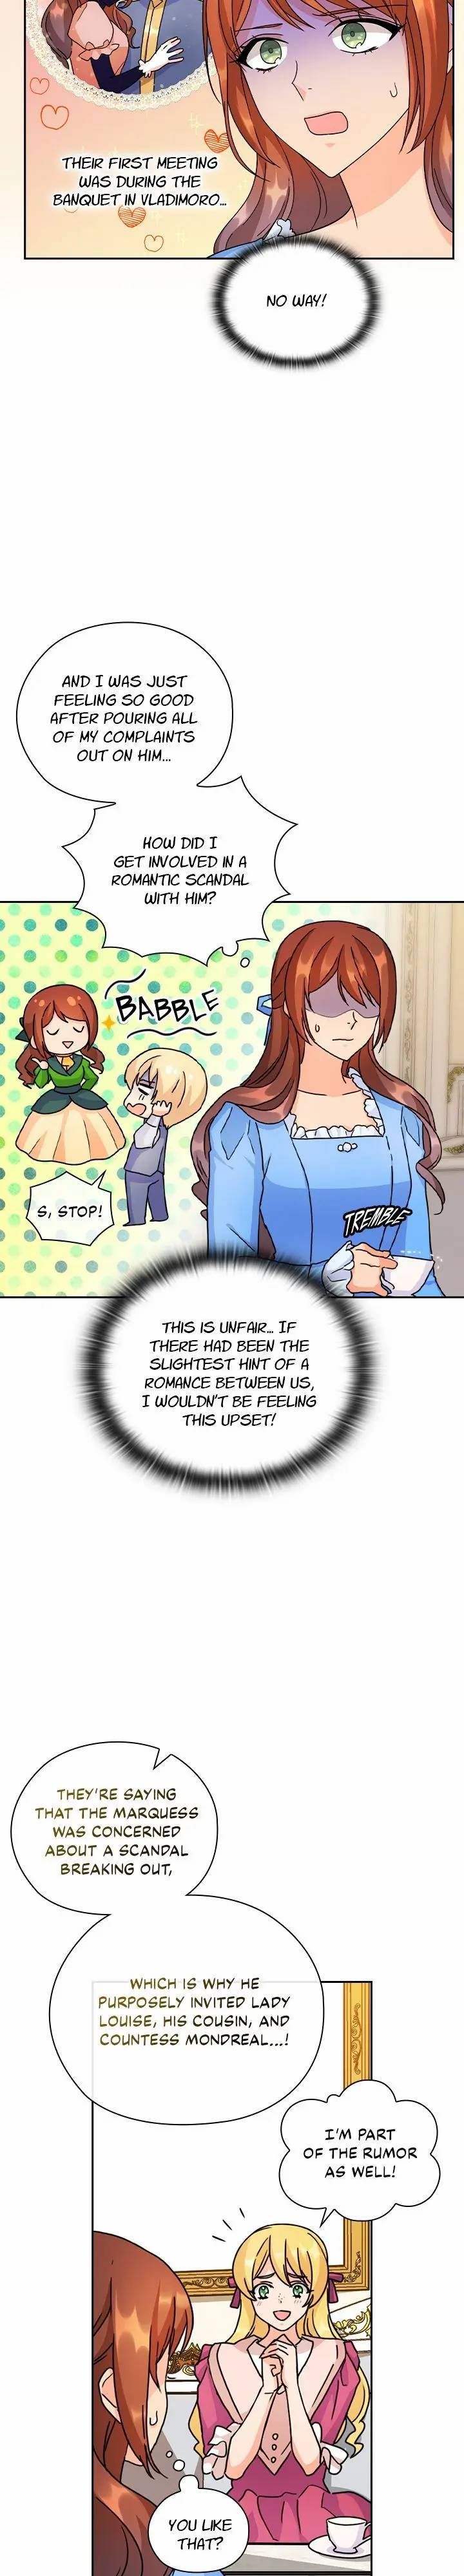 The Readymade Queen Chapter 40 page 3